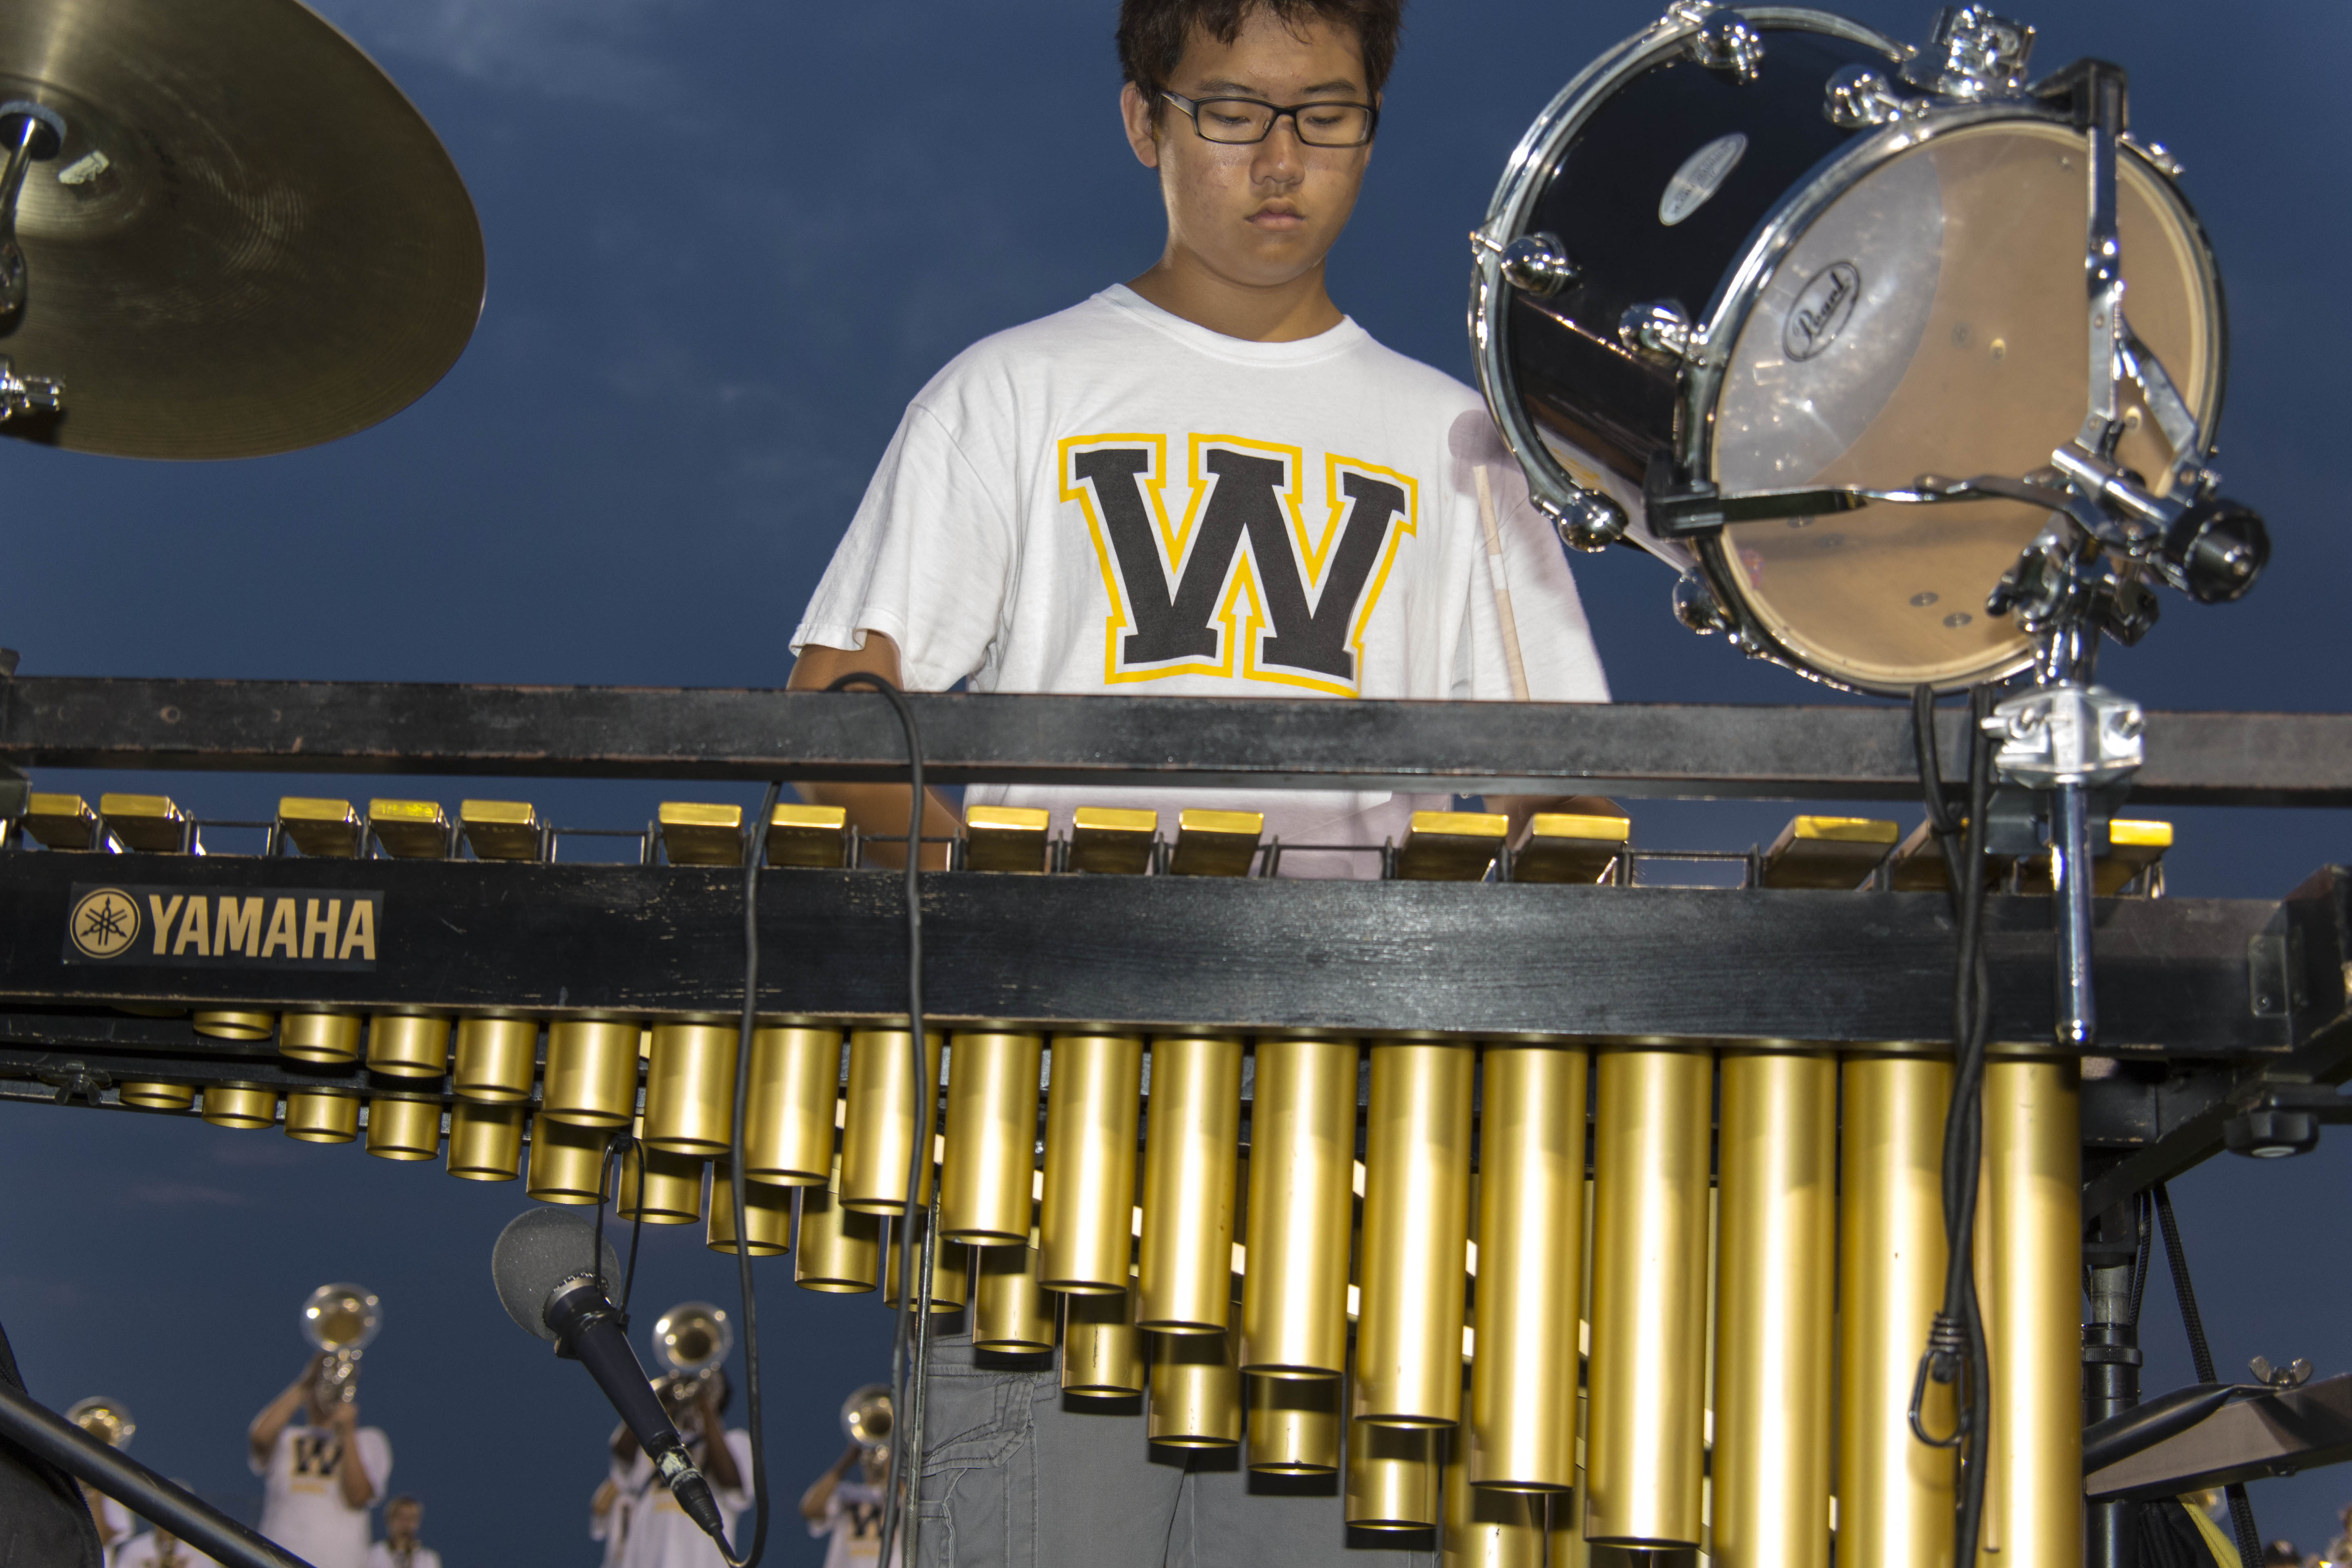 Percussionist Practices on Marimba in Preparation for Field Show